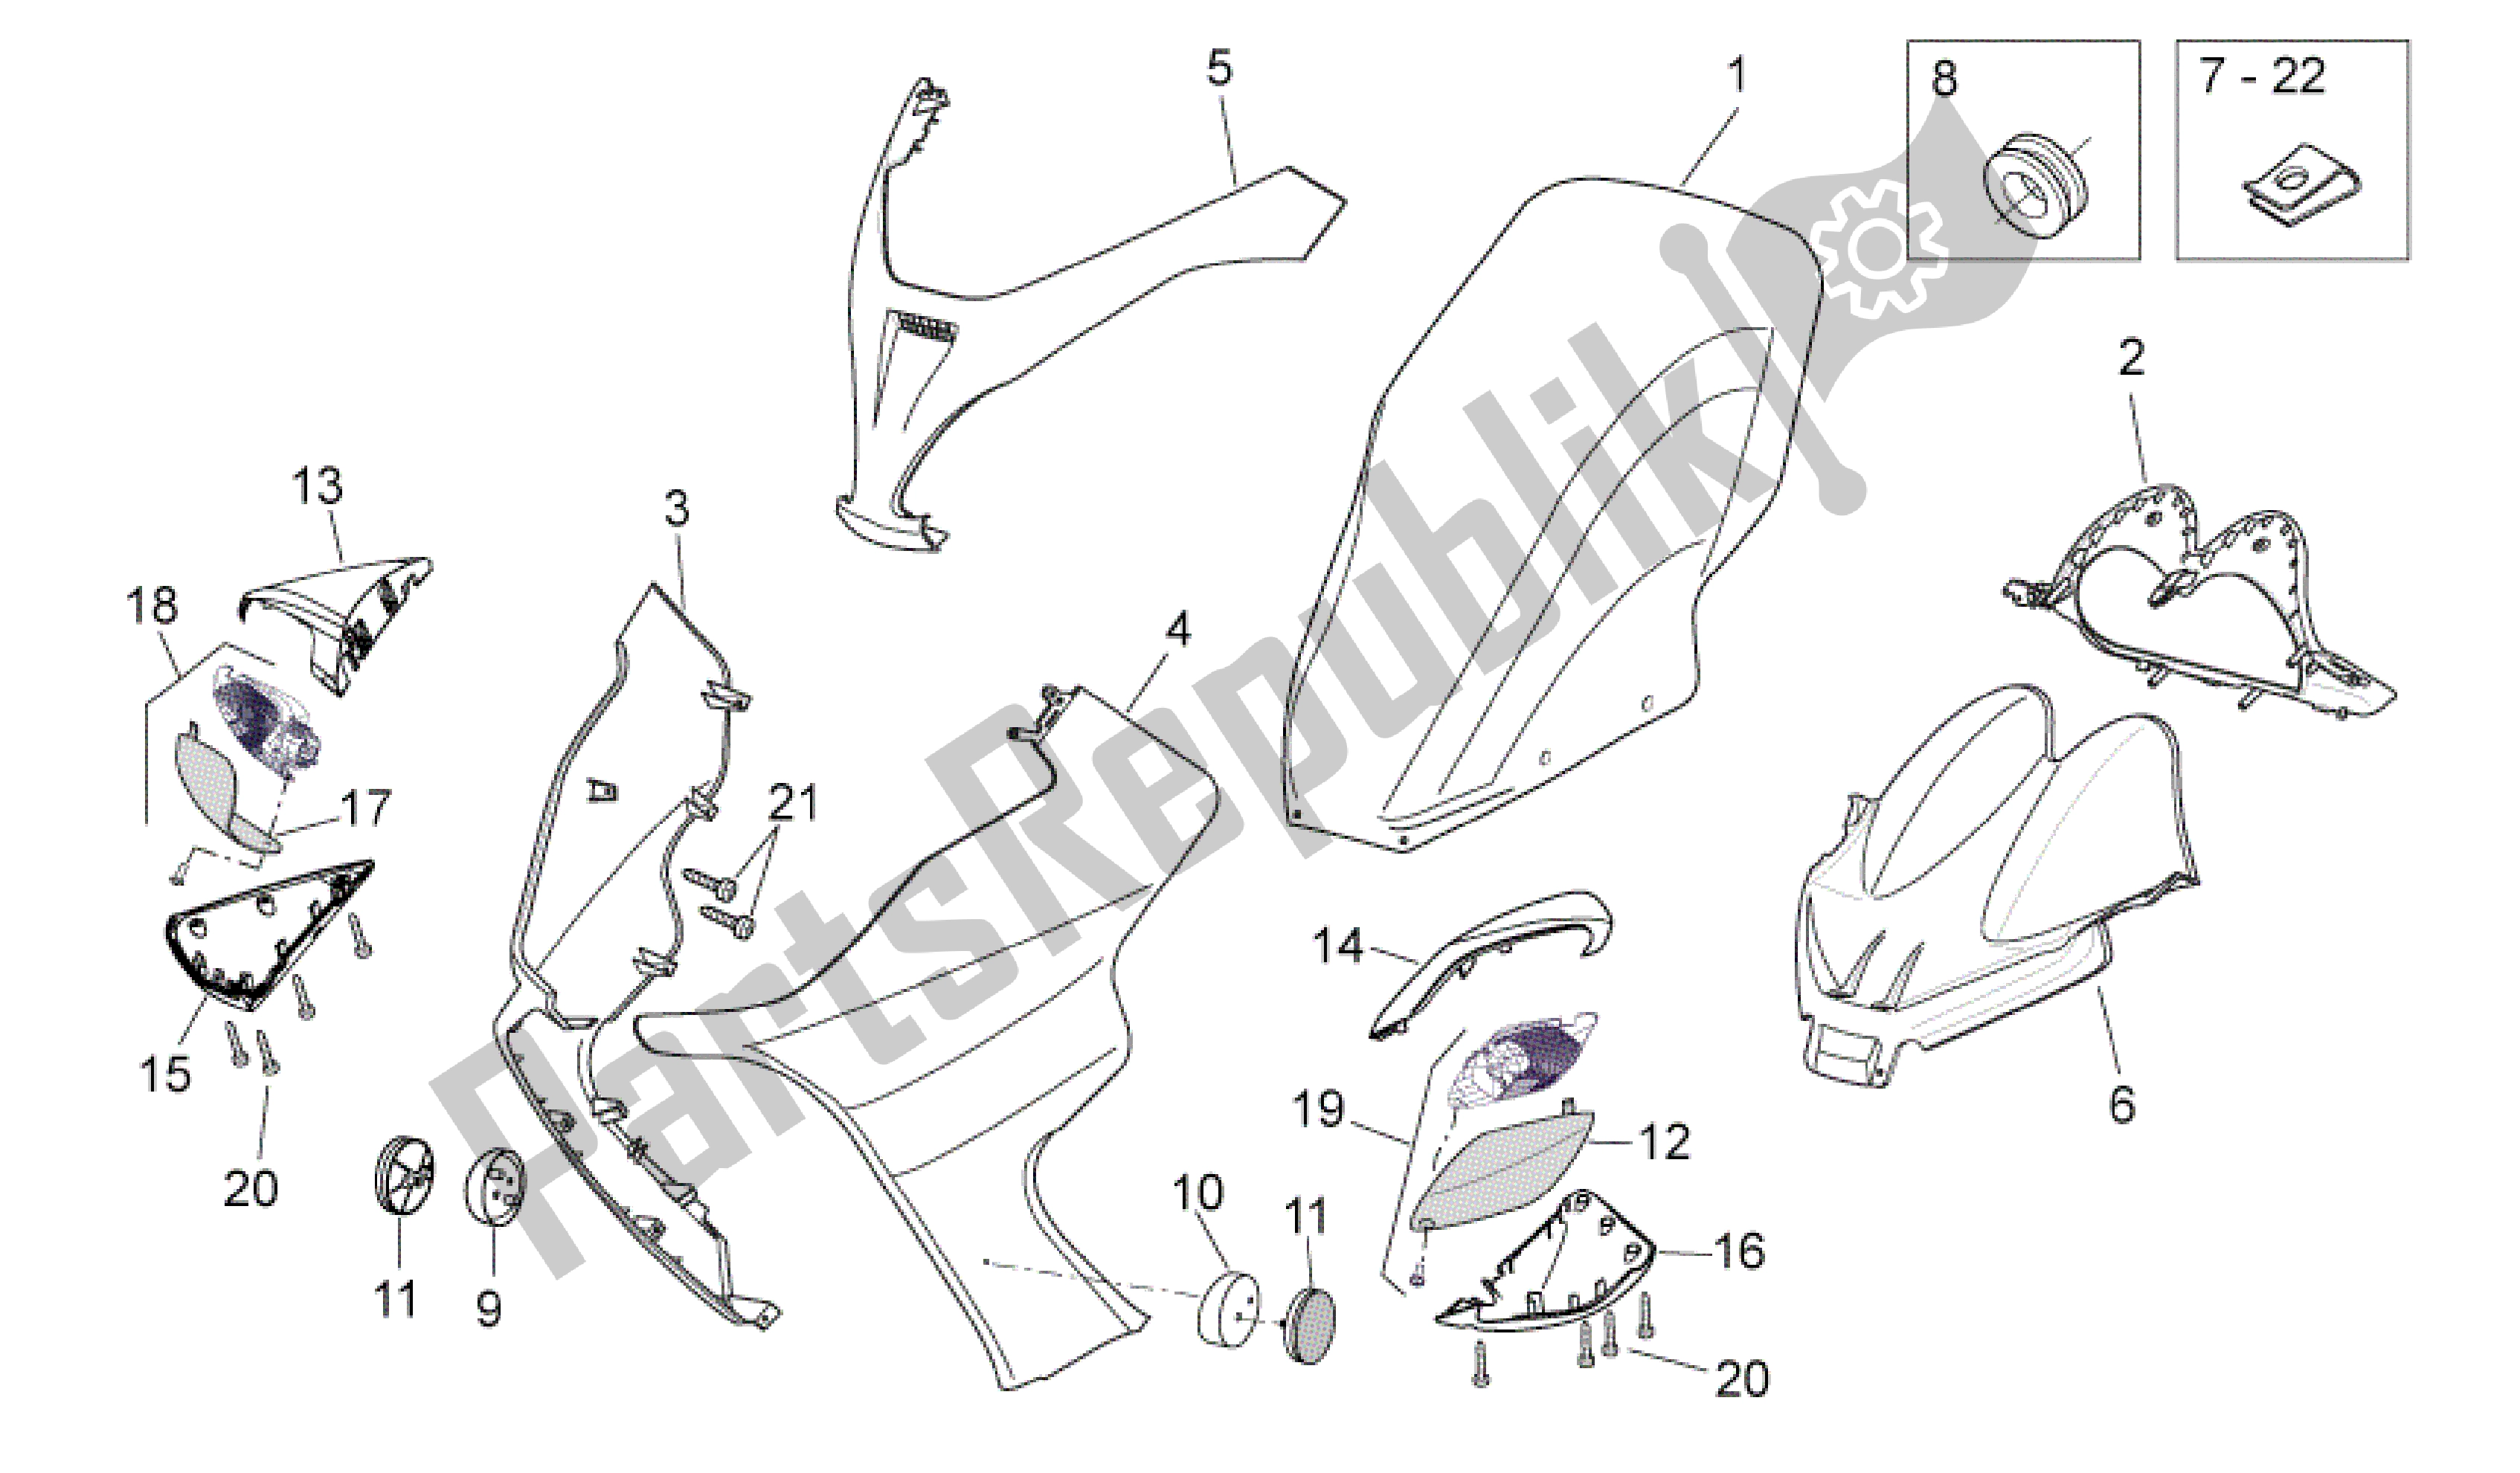 All parts for the Front Body I of the Aprilia Atlantic 200 2003 - 2006